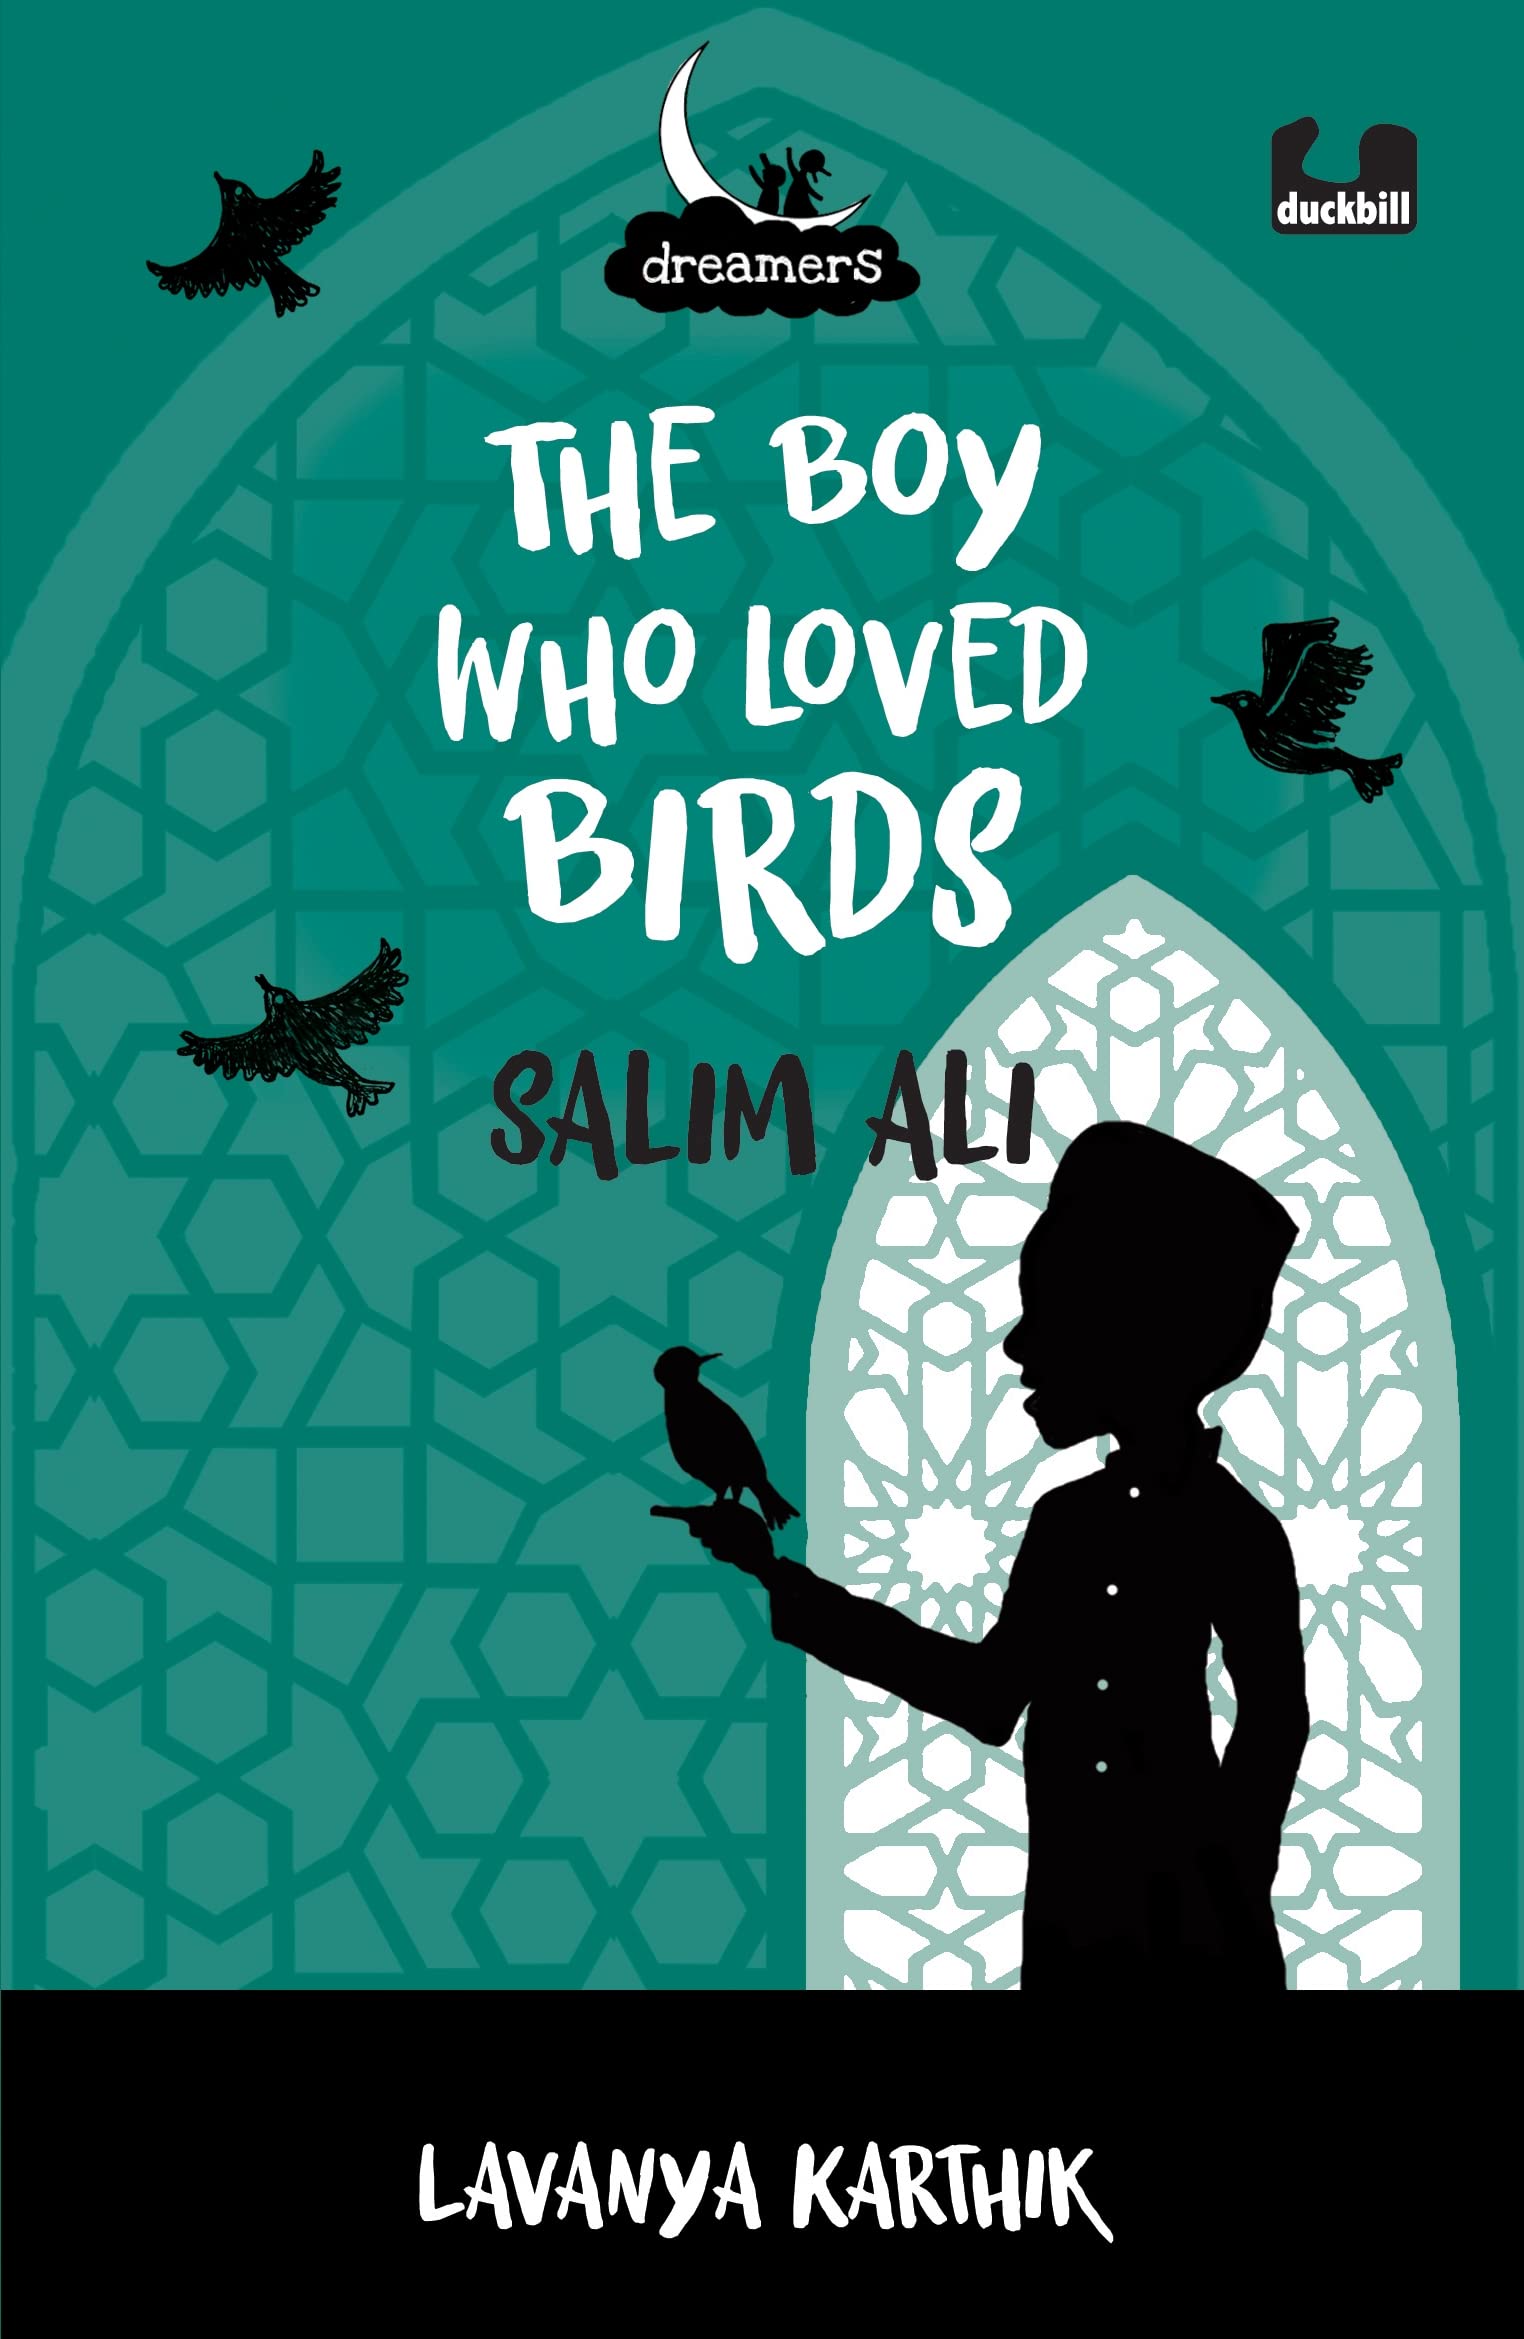 The Boy Who Loved Birds